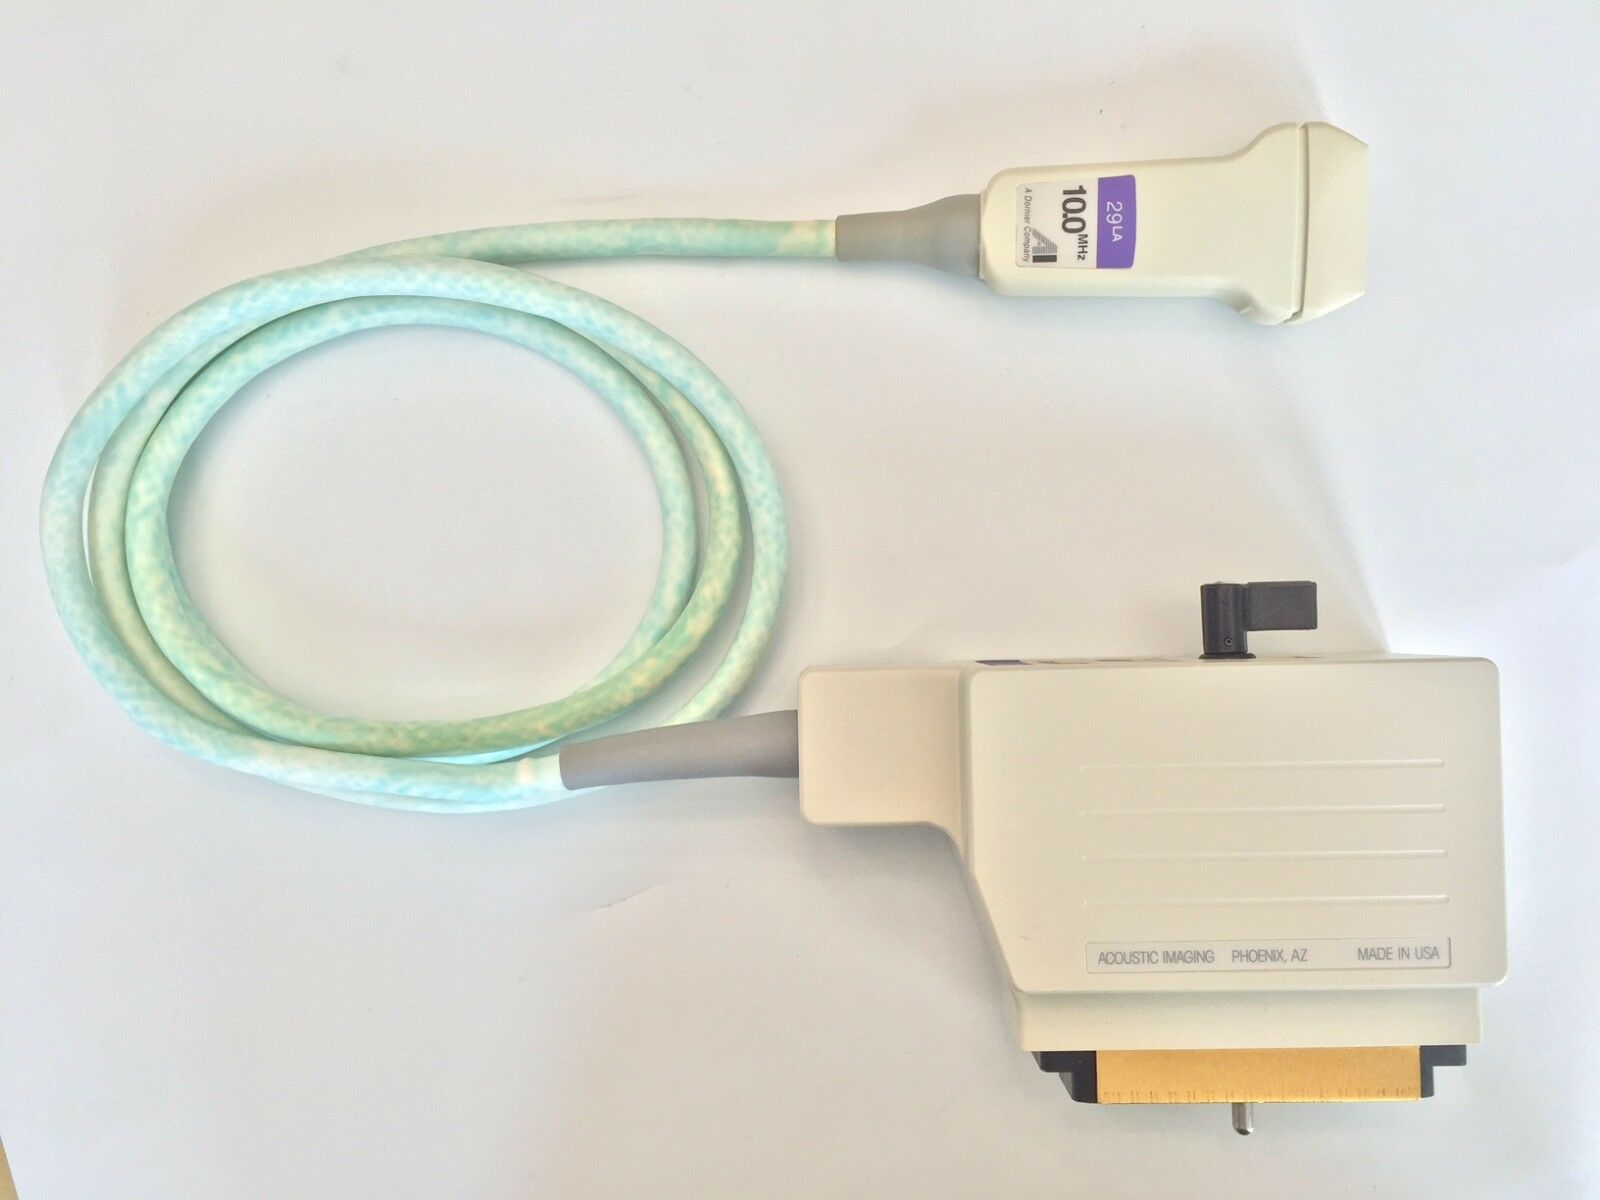 ACOUSTIC IMAGING 29LA 10.0 MHz.ULTRASOUND TRANSDUCER PROBE Used DIAGNOSTIC ULTRASOUND MACHINES FOR SALE